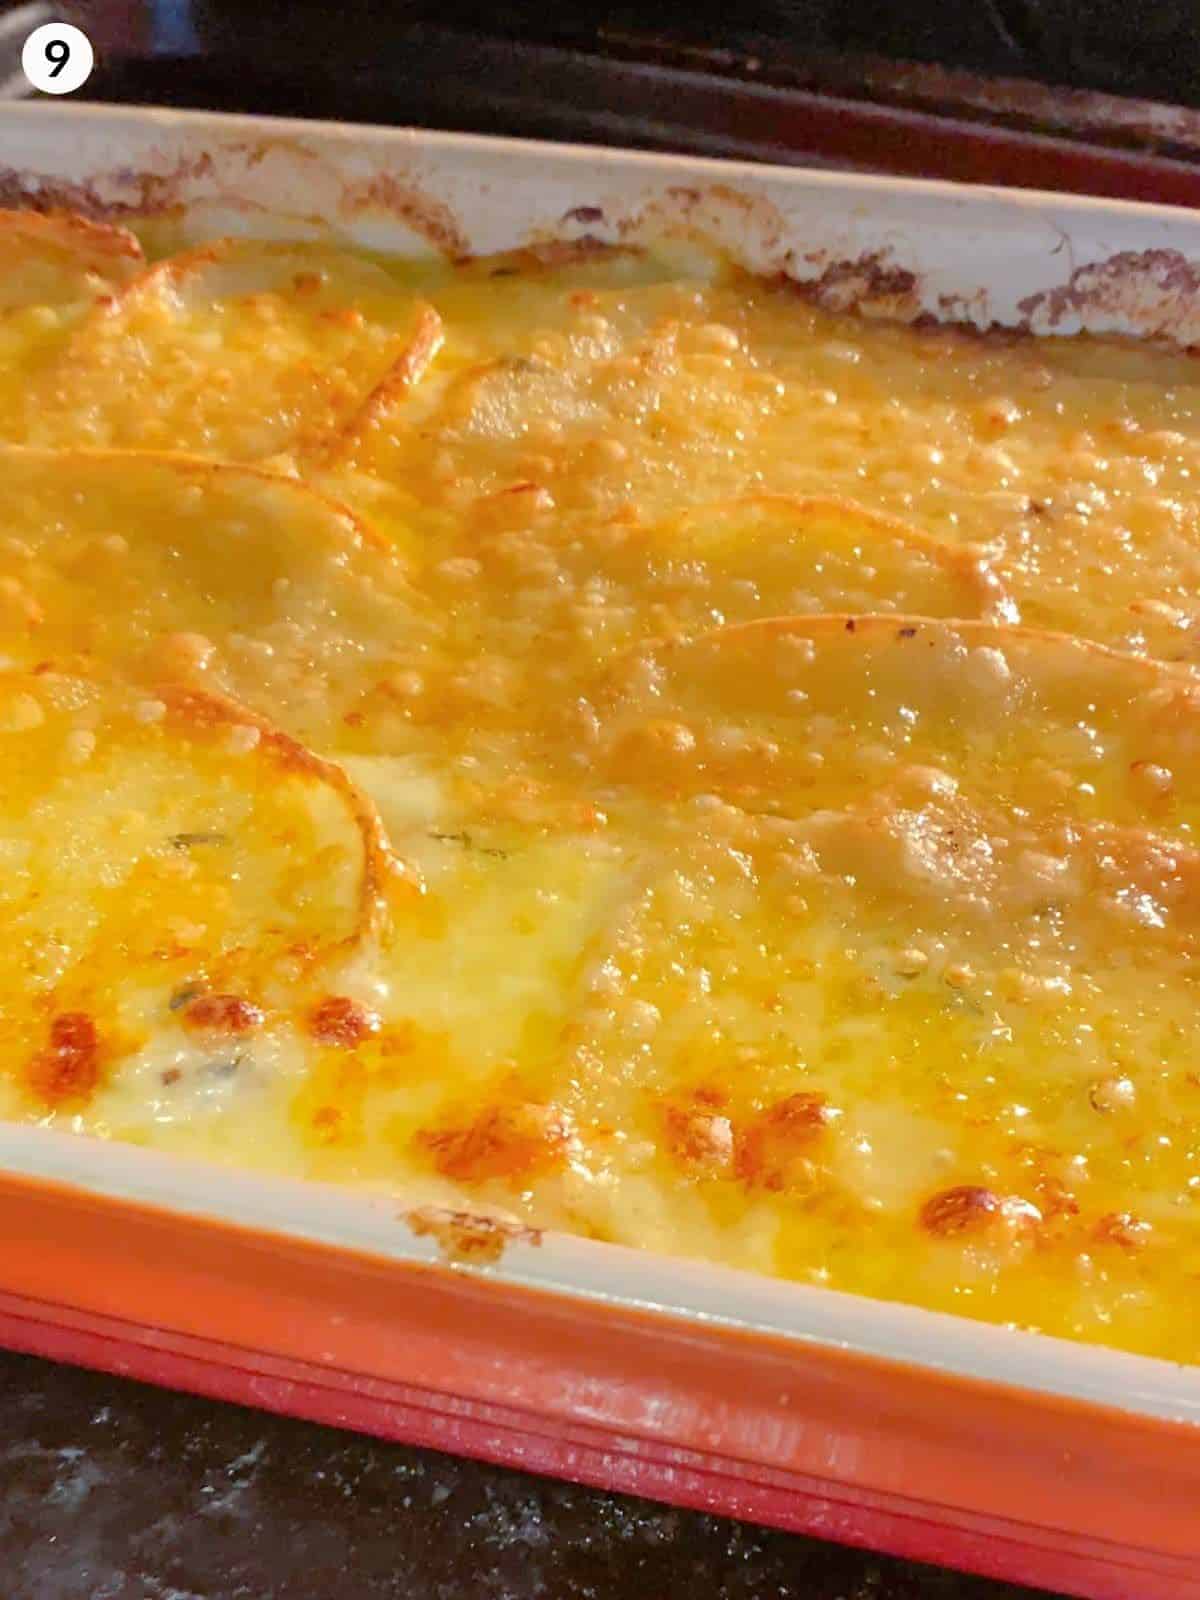 Bubbling cheese on potatoes au gratin in a baking dish